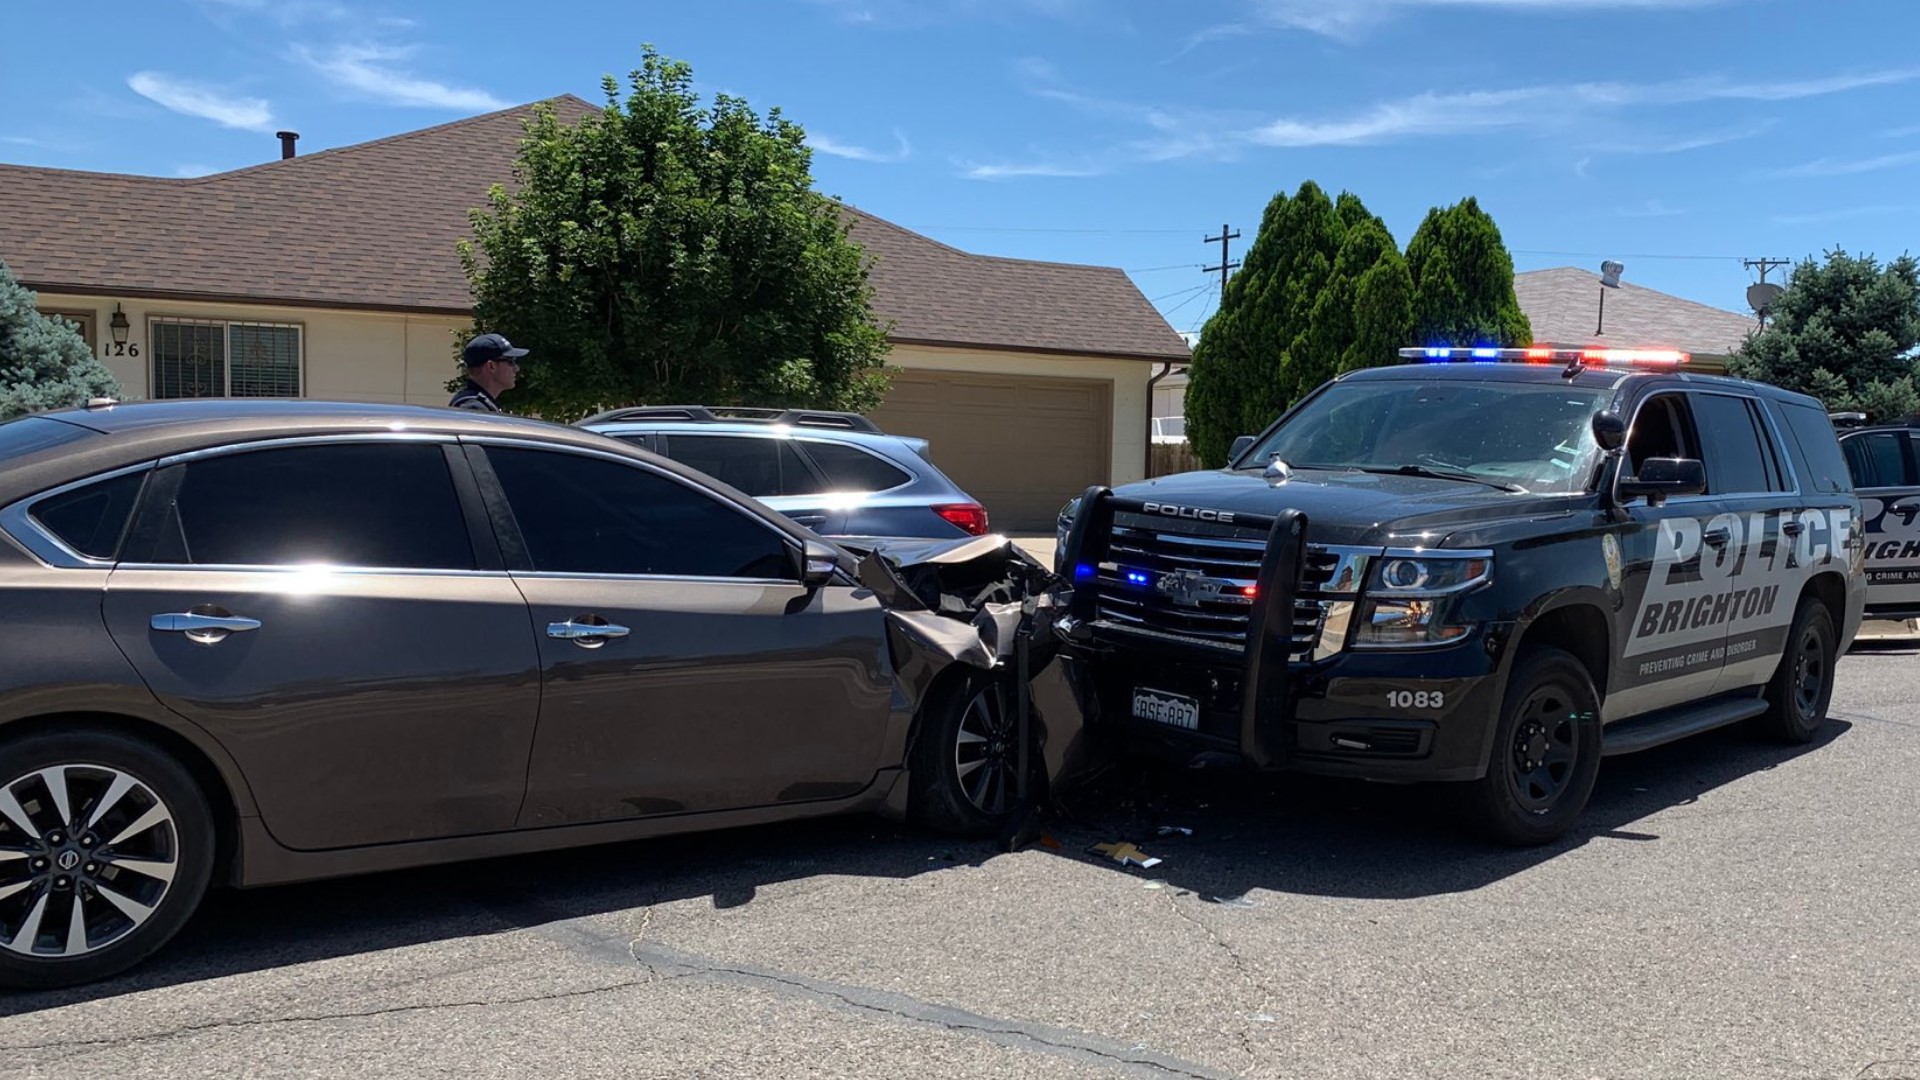 Raul Ortega, 51, is charged with multiple counts after reportedly carjacking a vehicle in Commerce City that had a child inside, the district attorney's office said.